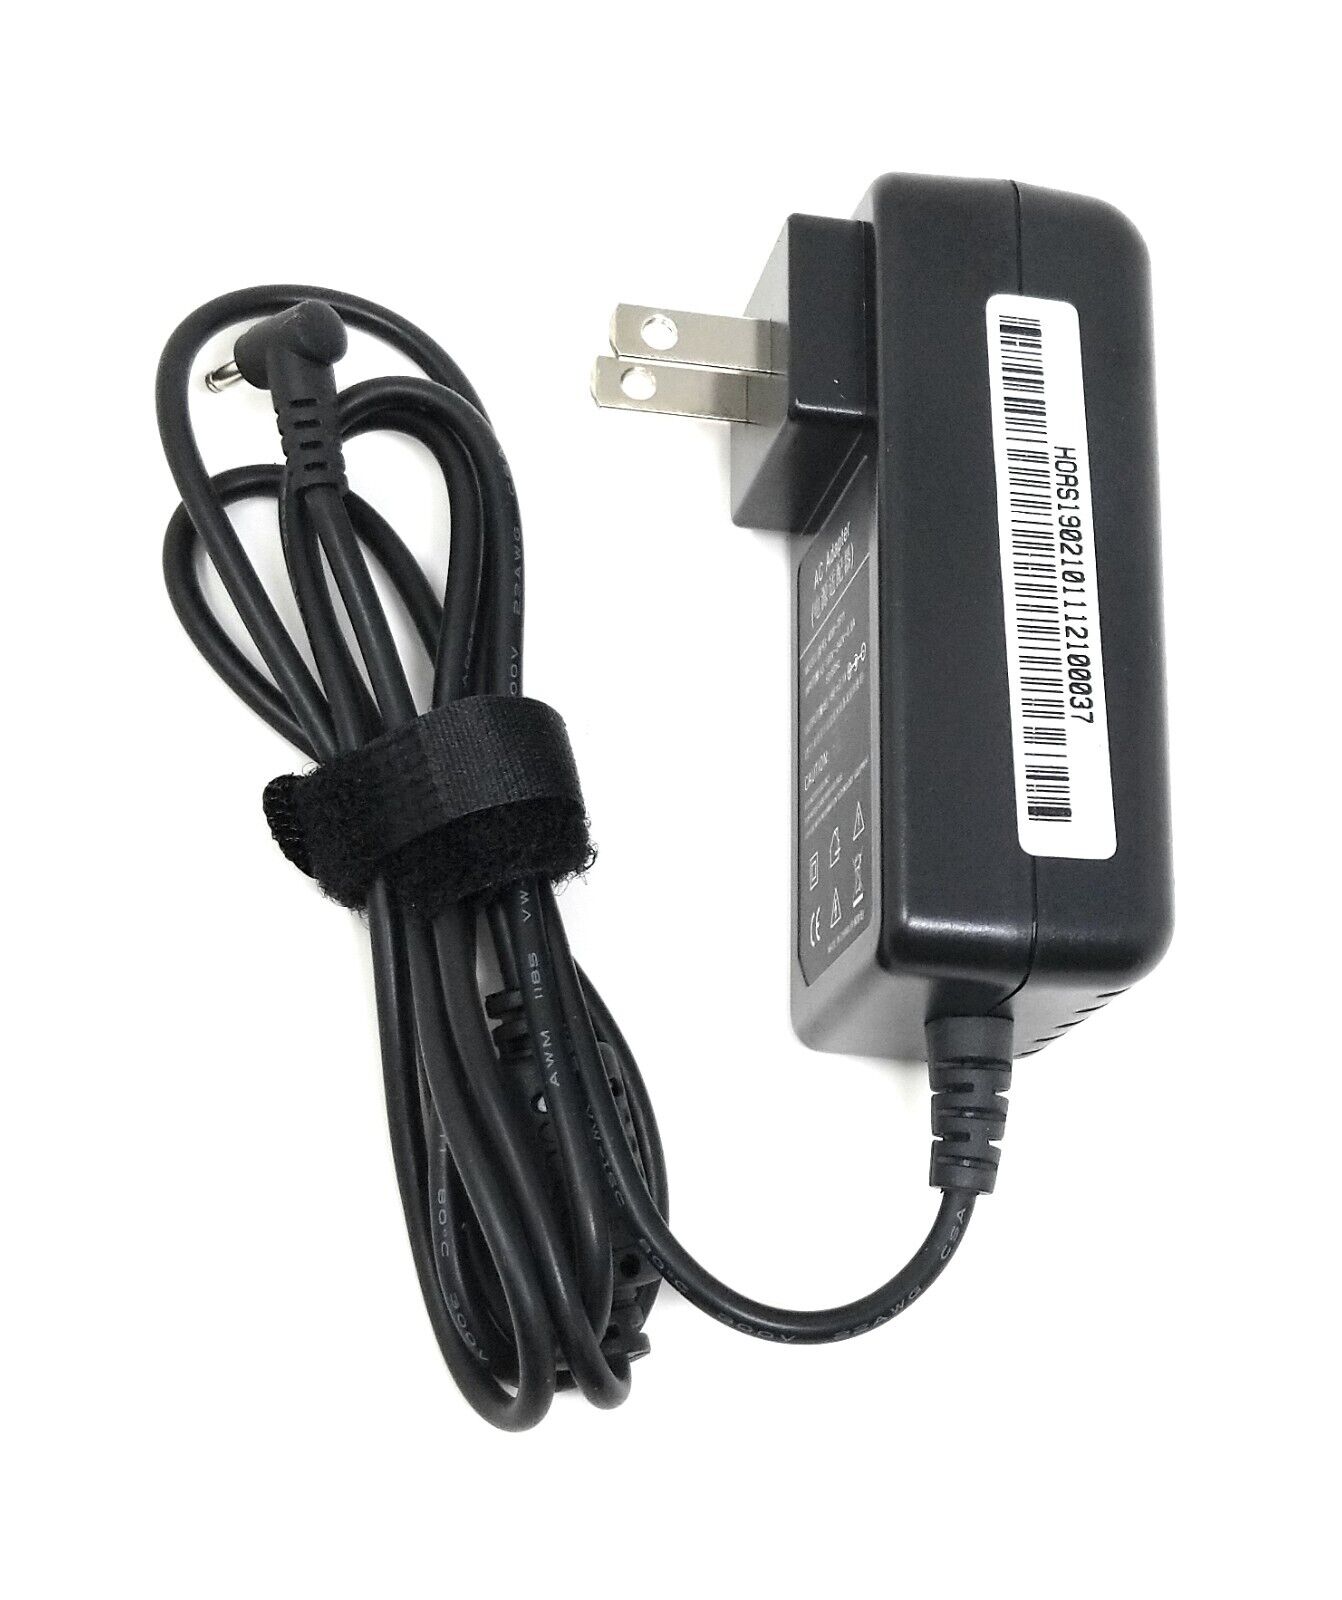 AC Adapter Charger 19V 2.1A 40W For ASUS Eee PC 1005HA 1001HA 1001P 1001PX